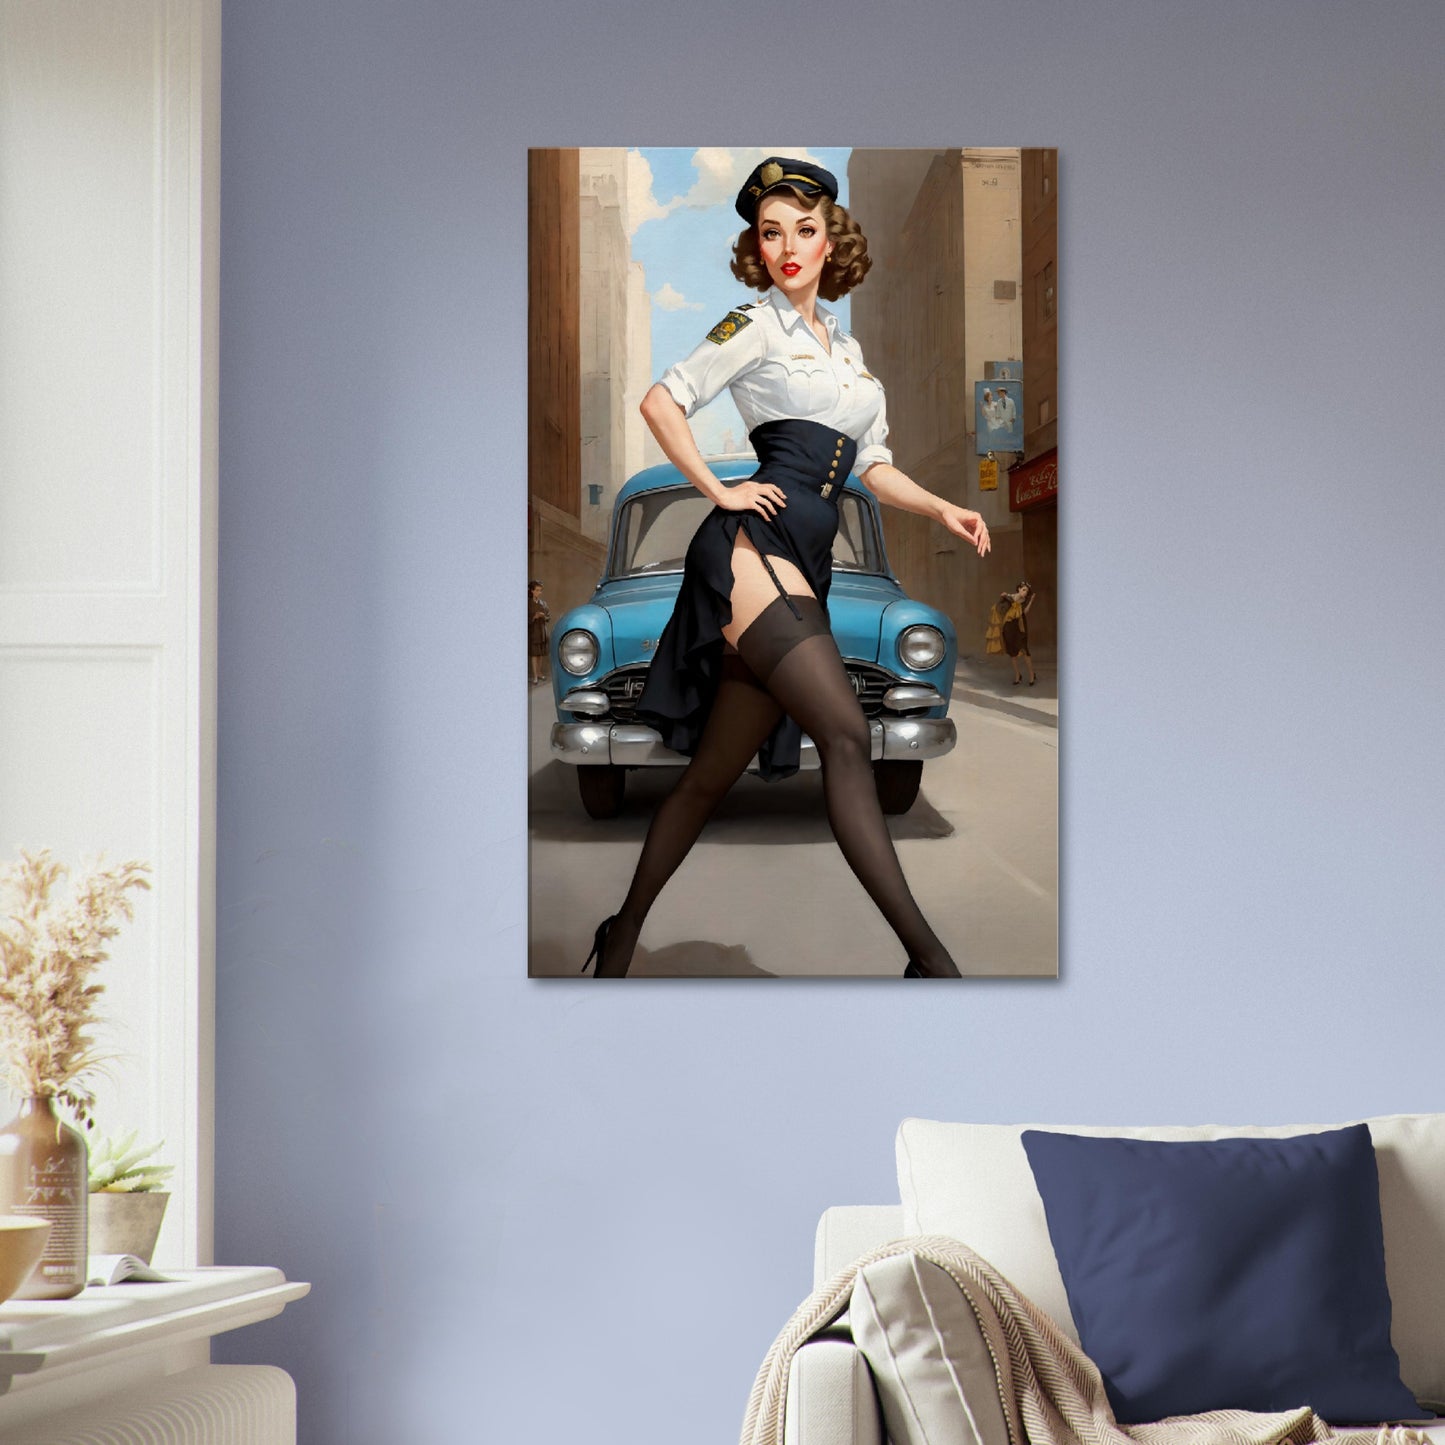 Daily Pinup #04 - The Traffic Stop Retro Pinup Wall Art